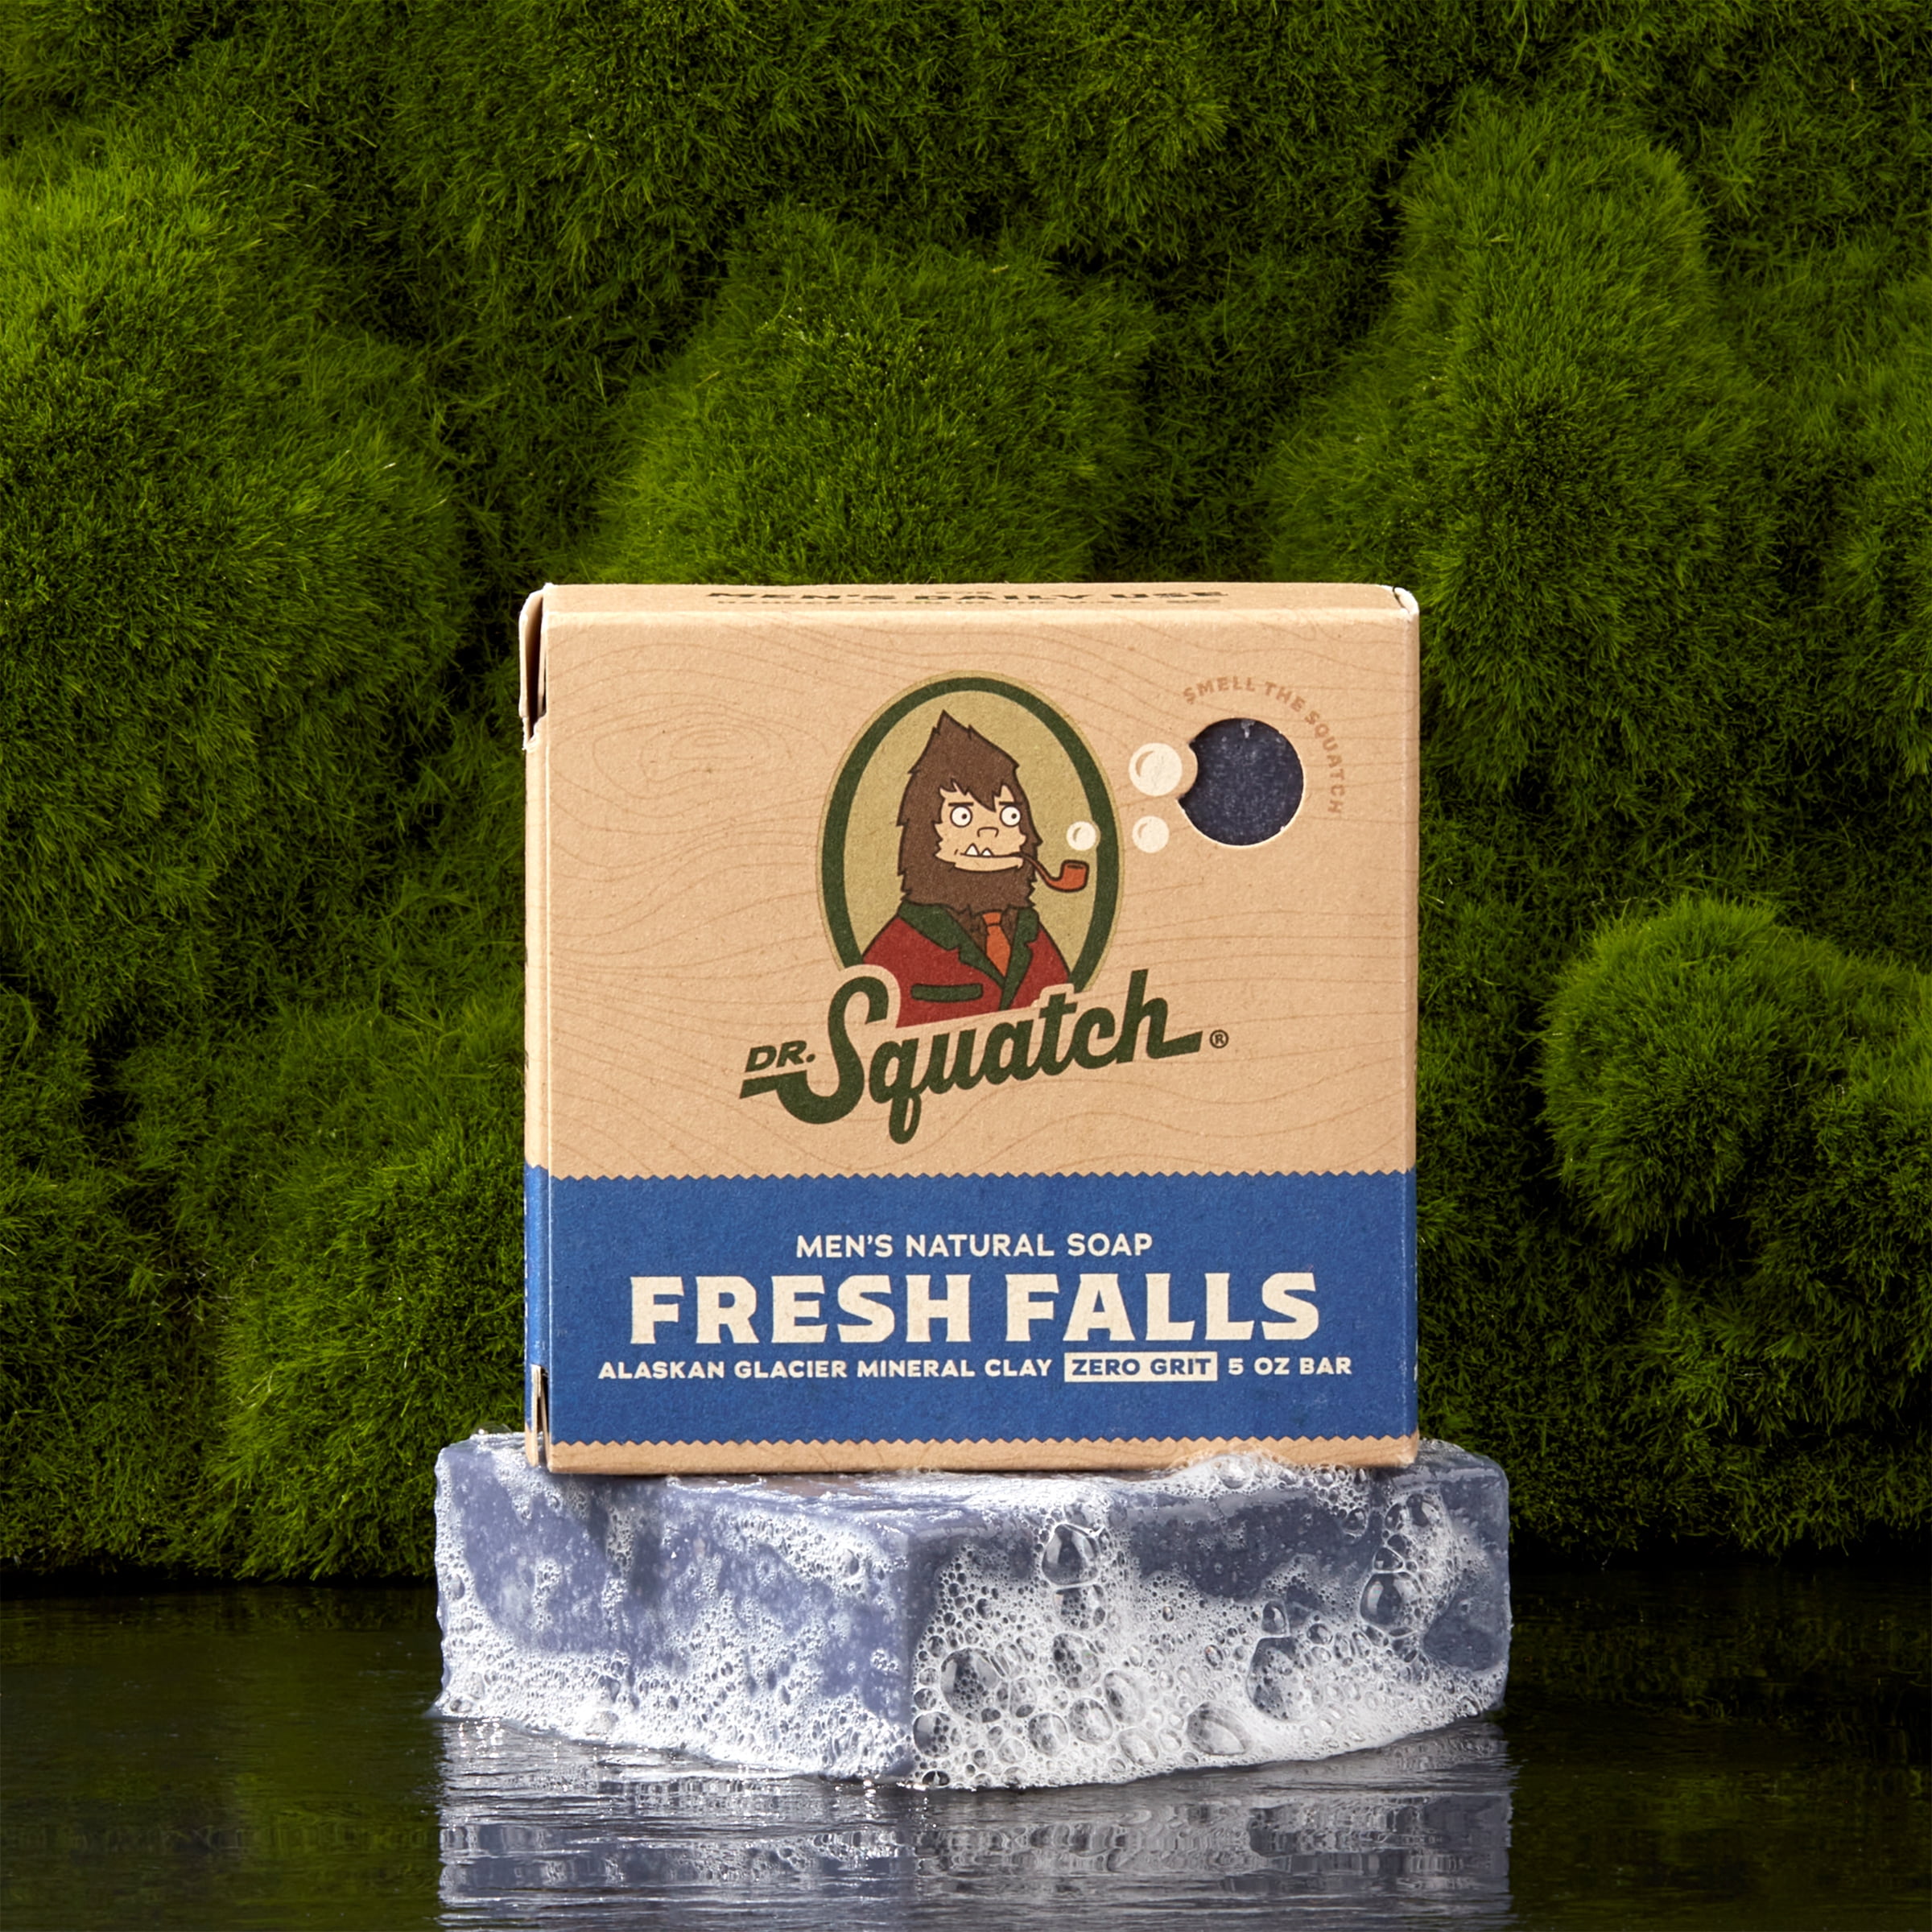 Dr. Squatch Fresh Fall Men's Natural Soap - LIMITED EDITION SALE